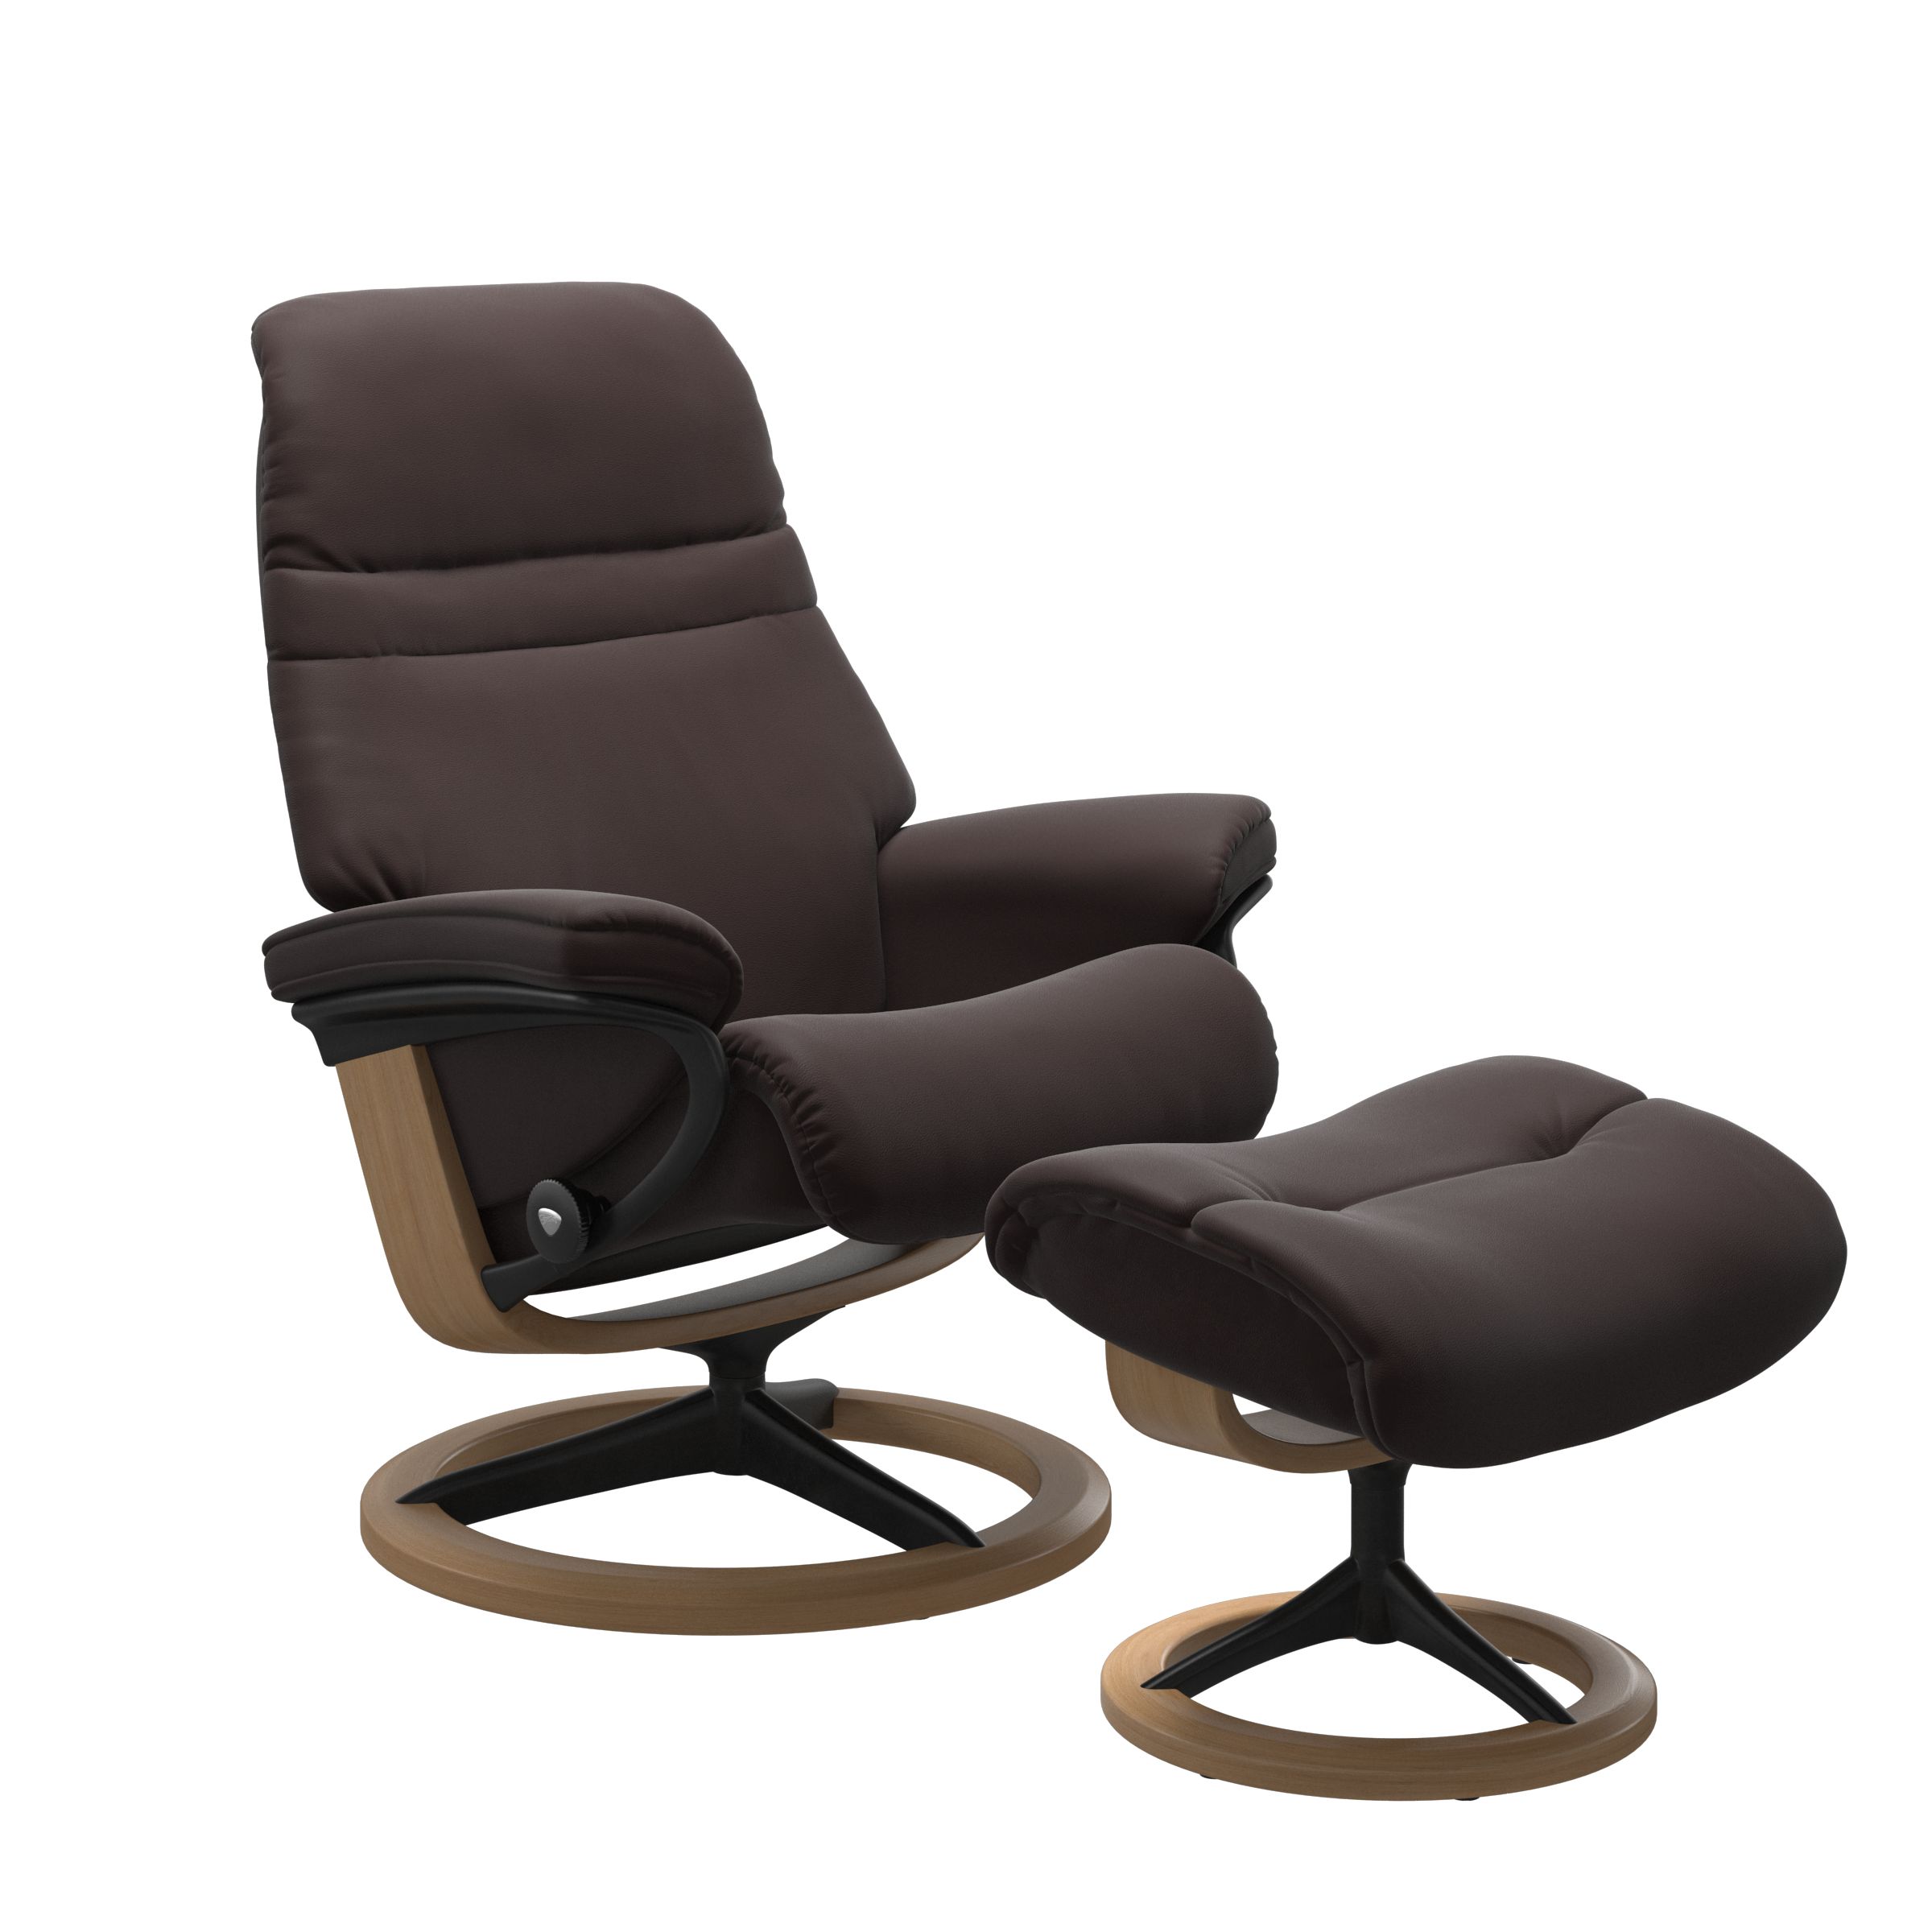 Stressless Sunrise Medium Recliner and Ottoman with Signature Base